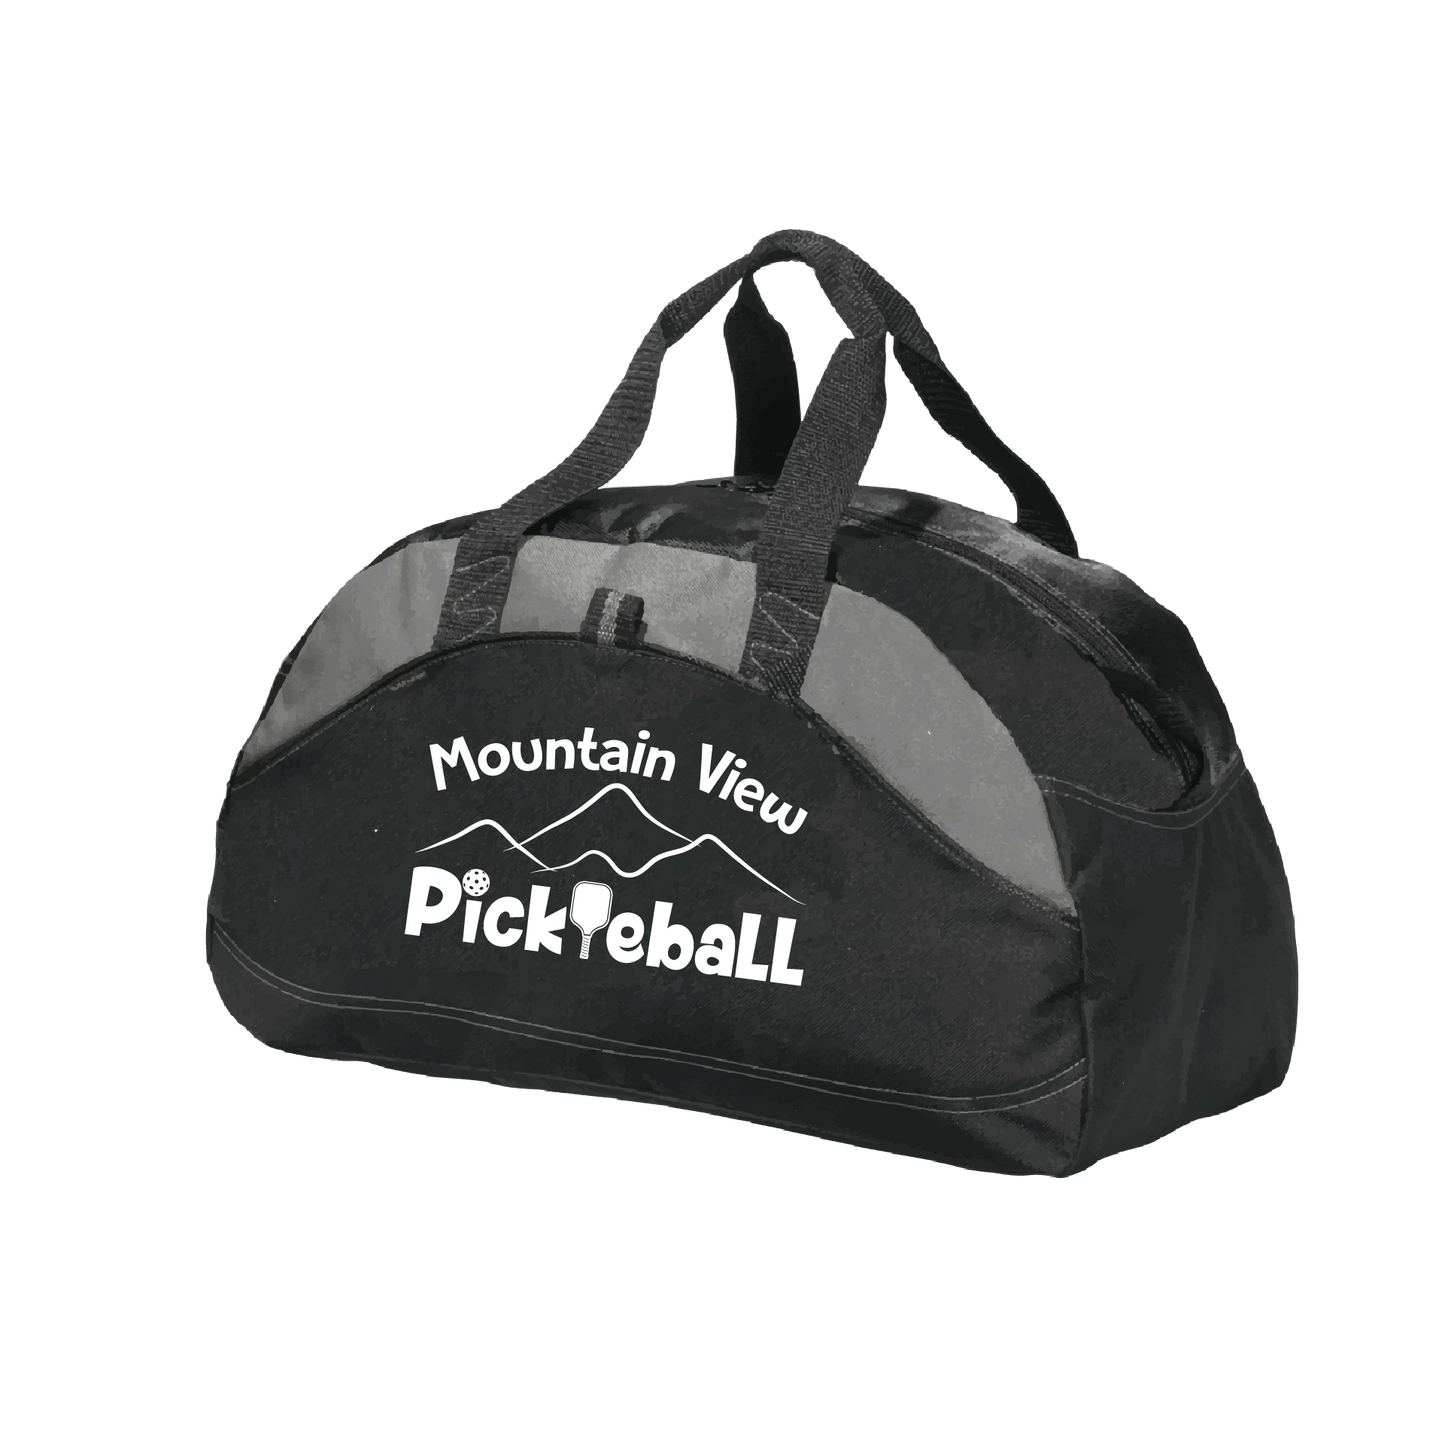 Pickleball Design: Mt. View Pickleball Club  Carry your gear in comfort and style. This fun pickleball duffel bag is the perfect accessory for all pickleball players needing to keep their gear in one place. This medium sized duffel tote is ideal for all your pickleball activities. The large center compartment allows for plenty of space and the mesh end pocket is perfect for holding a water bottle. Duffel bag comes with an adjustable shoulder strap and the polyester material is durable and easily cleaned.